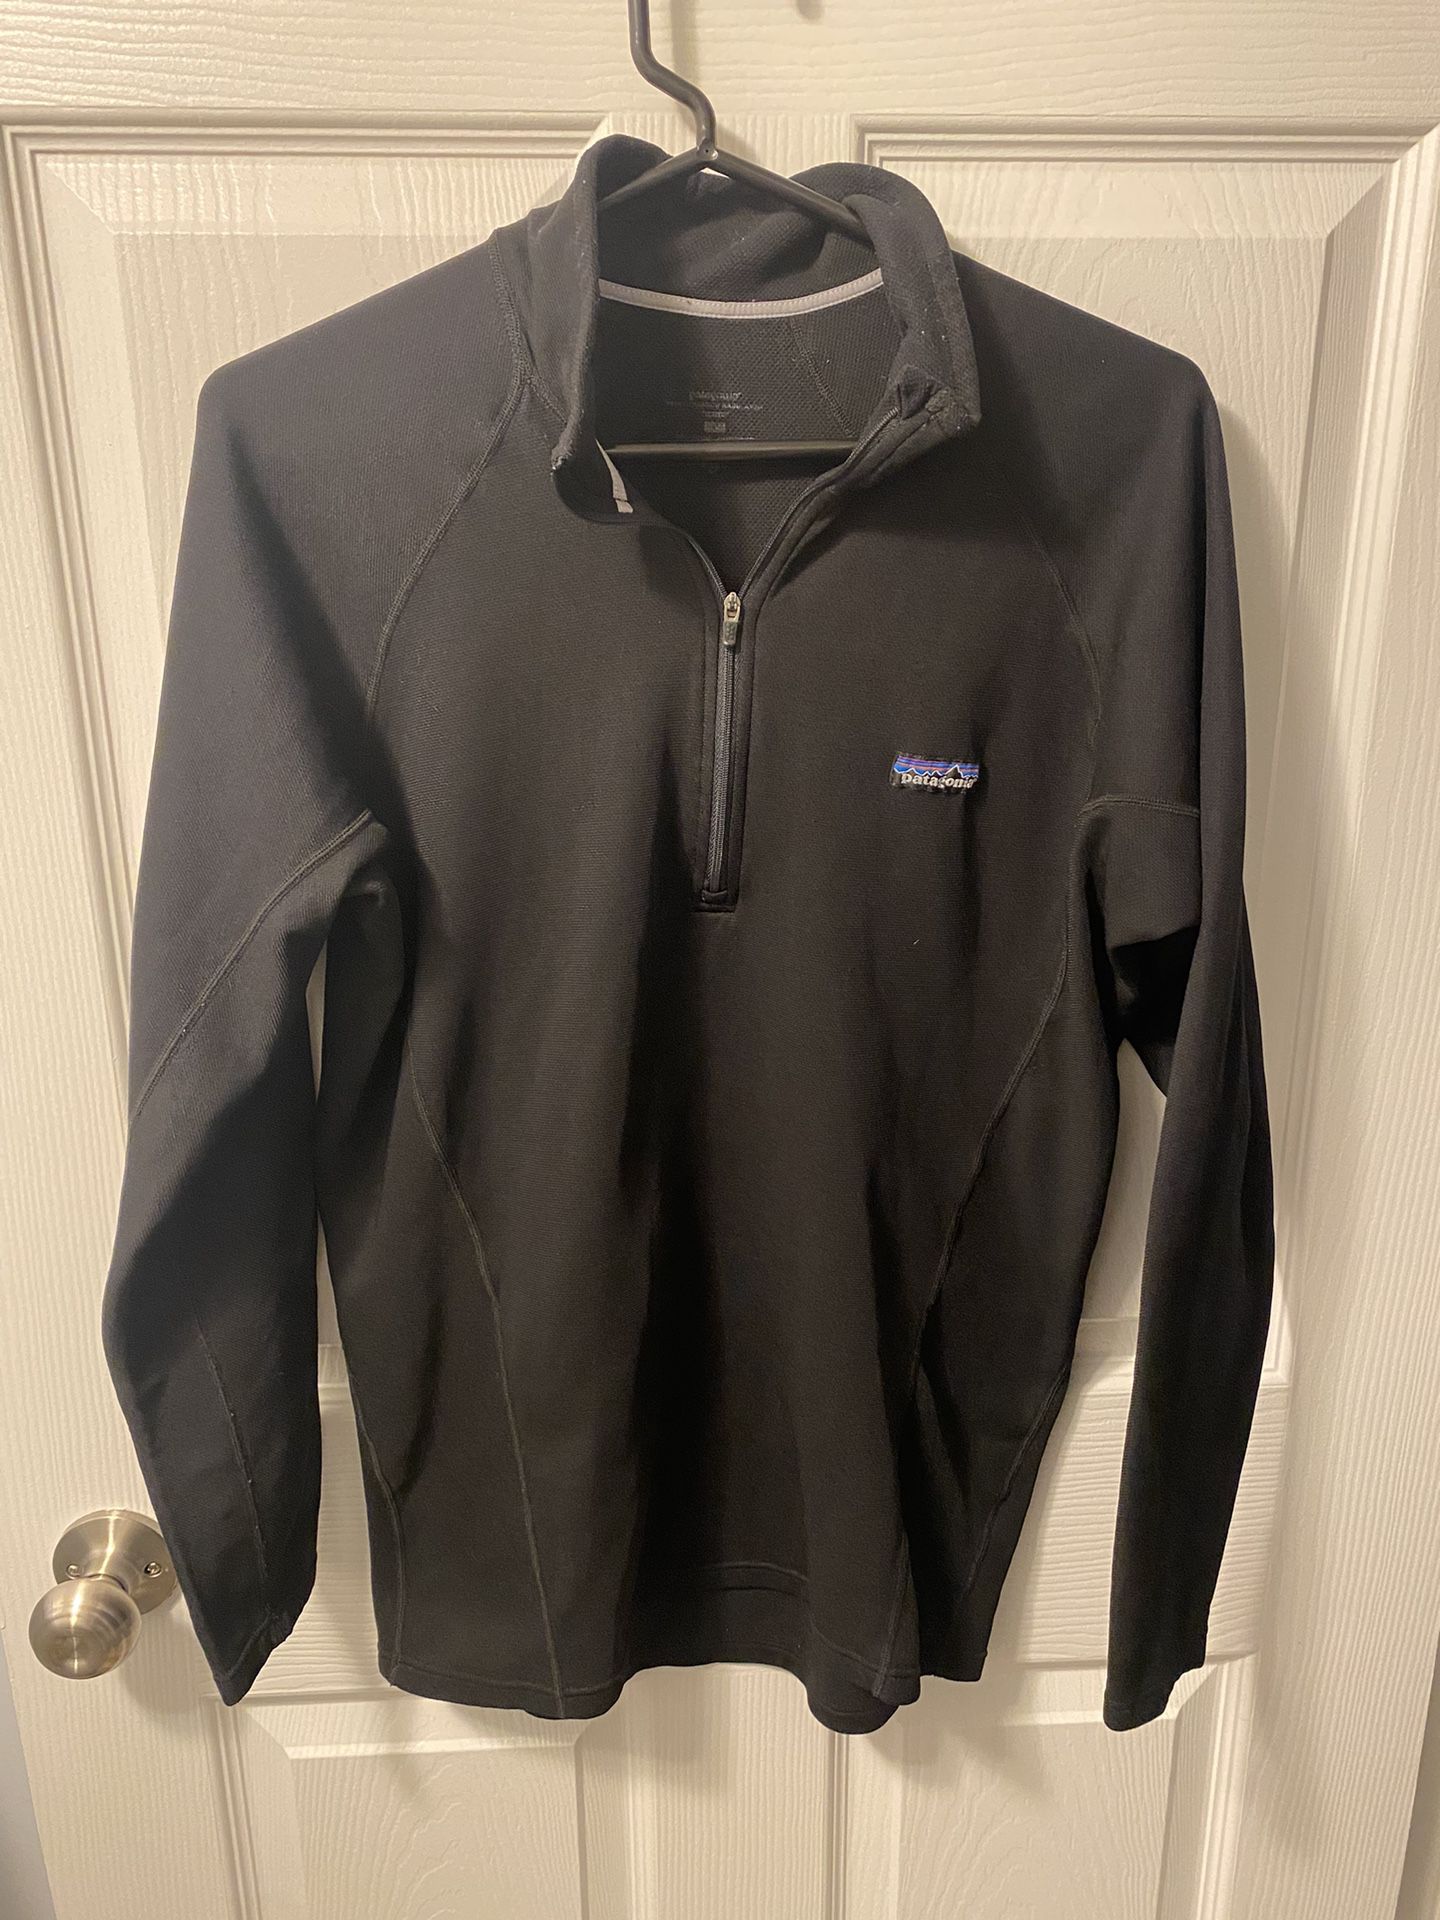 Men’s Large Patagonia Quarter Zip 1/4 Pullover Black Adult L Fast Shipping USA